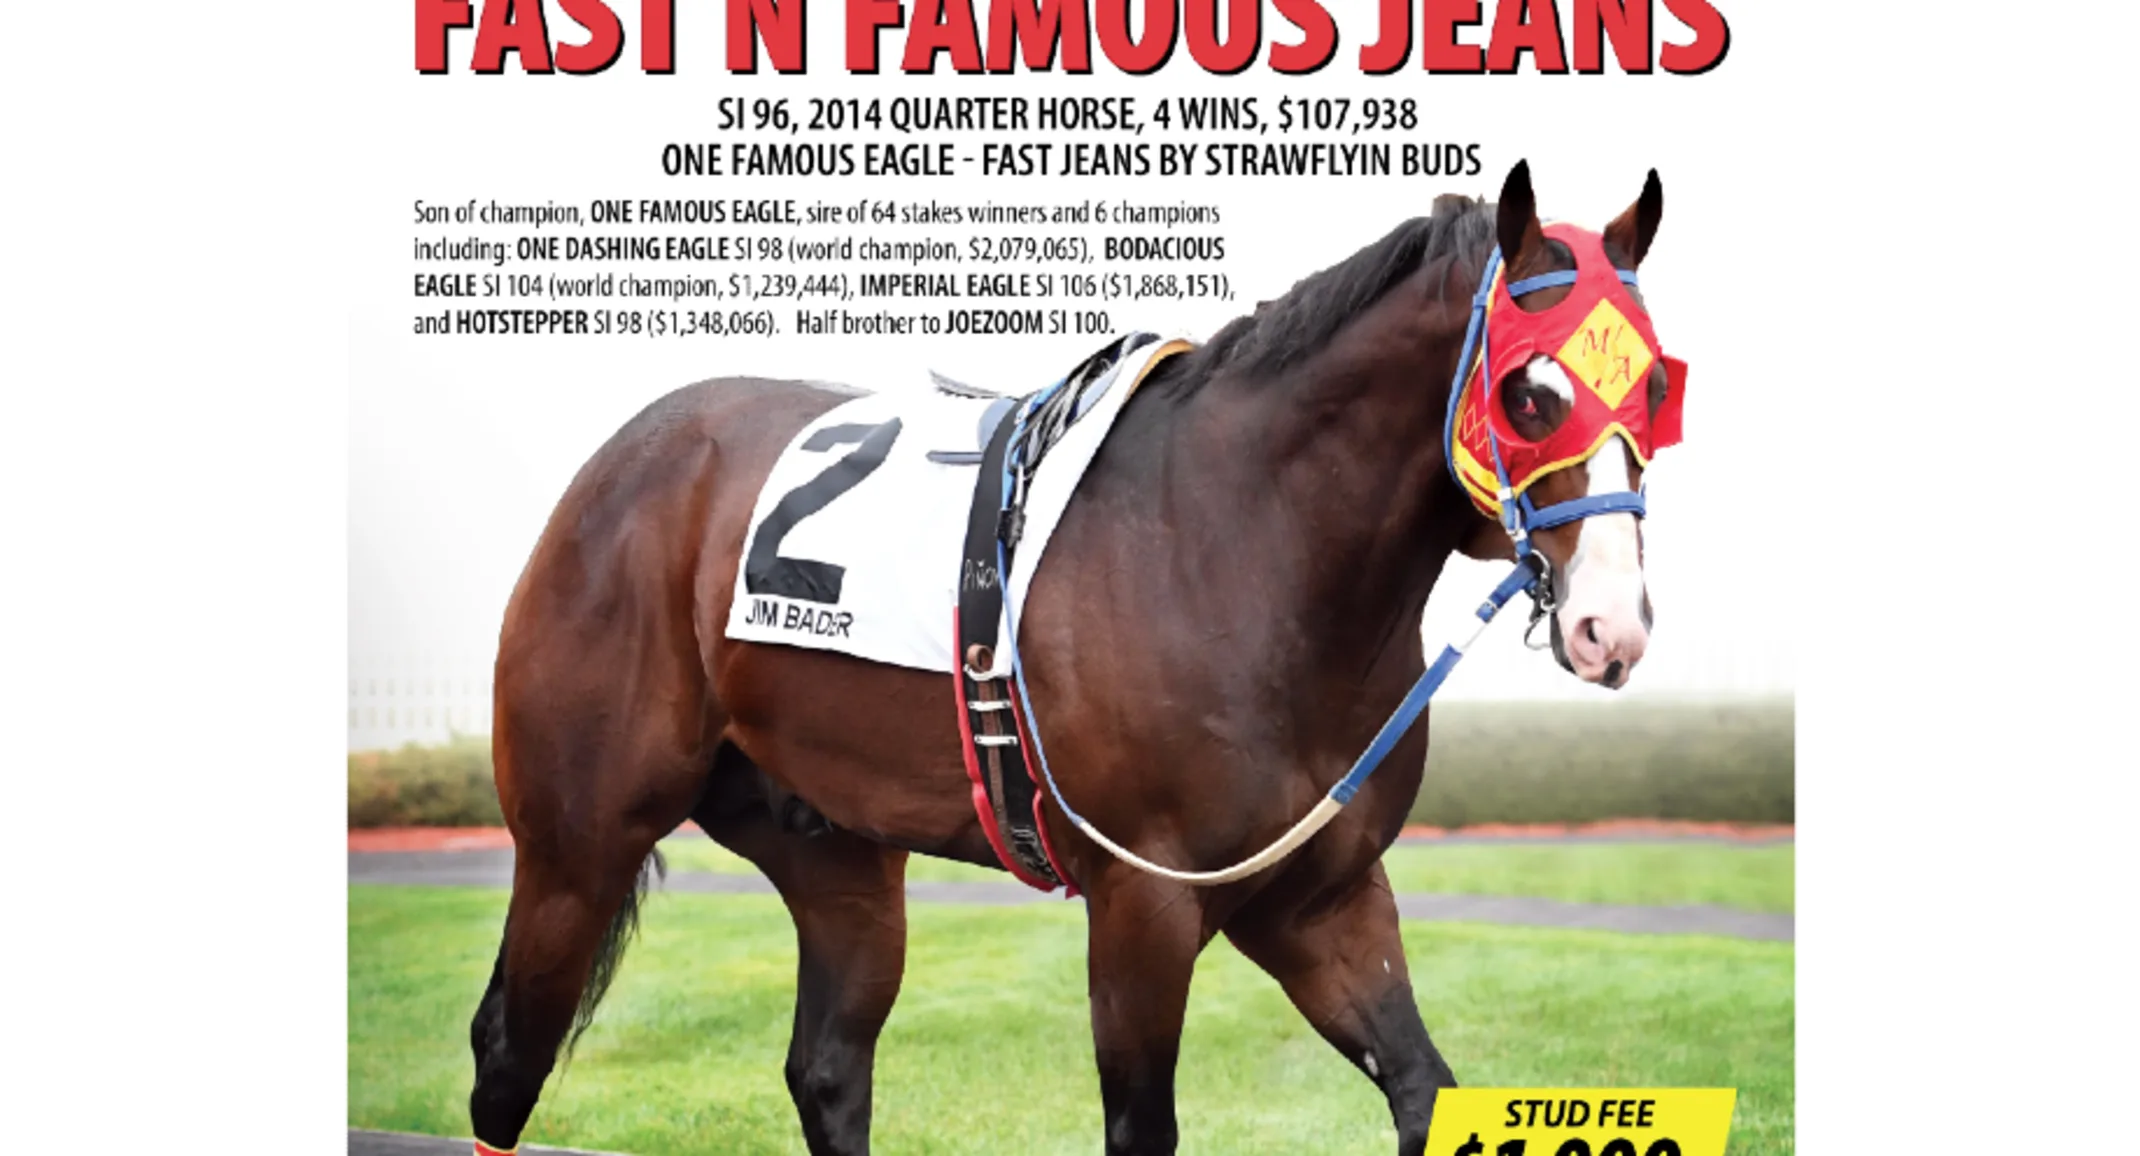 Advertisement of Fast N Famous Jeans with description and pricing